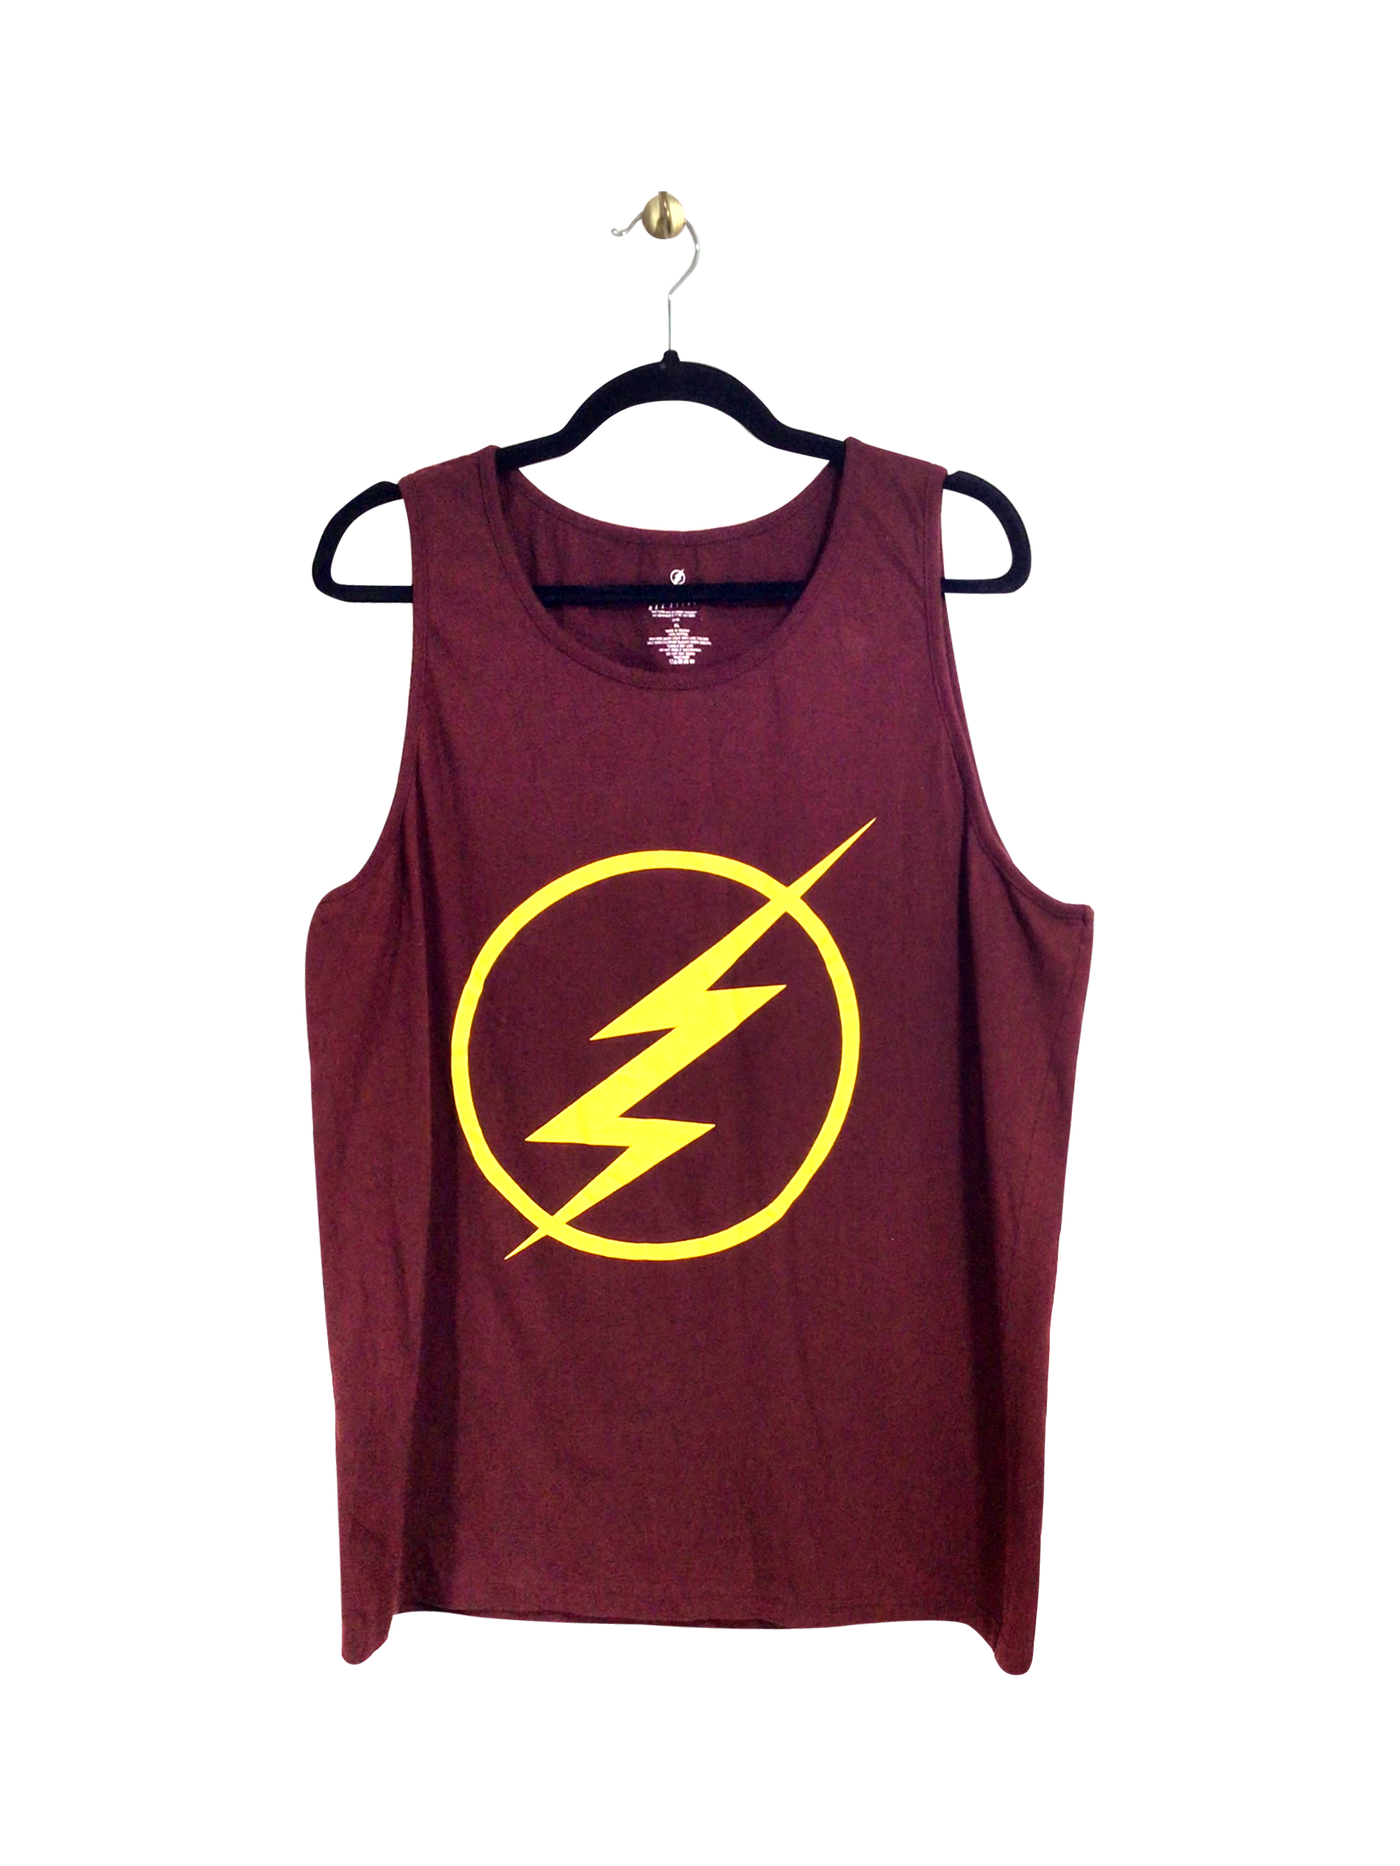 THE FLASH Regular fit T-shirt in Red - Size XL | 15 $ KOOP